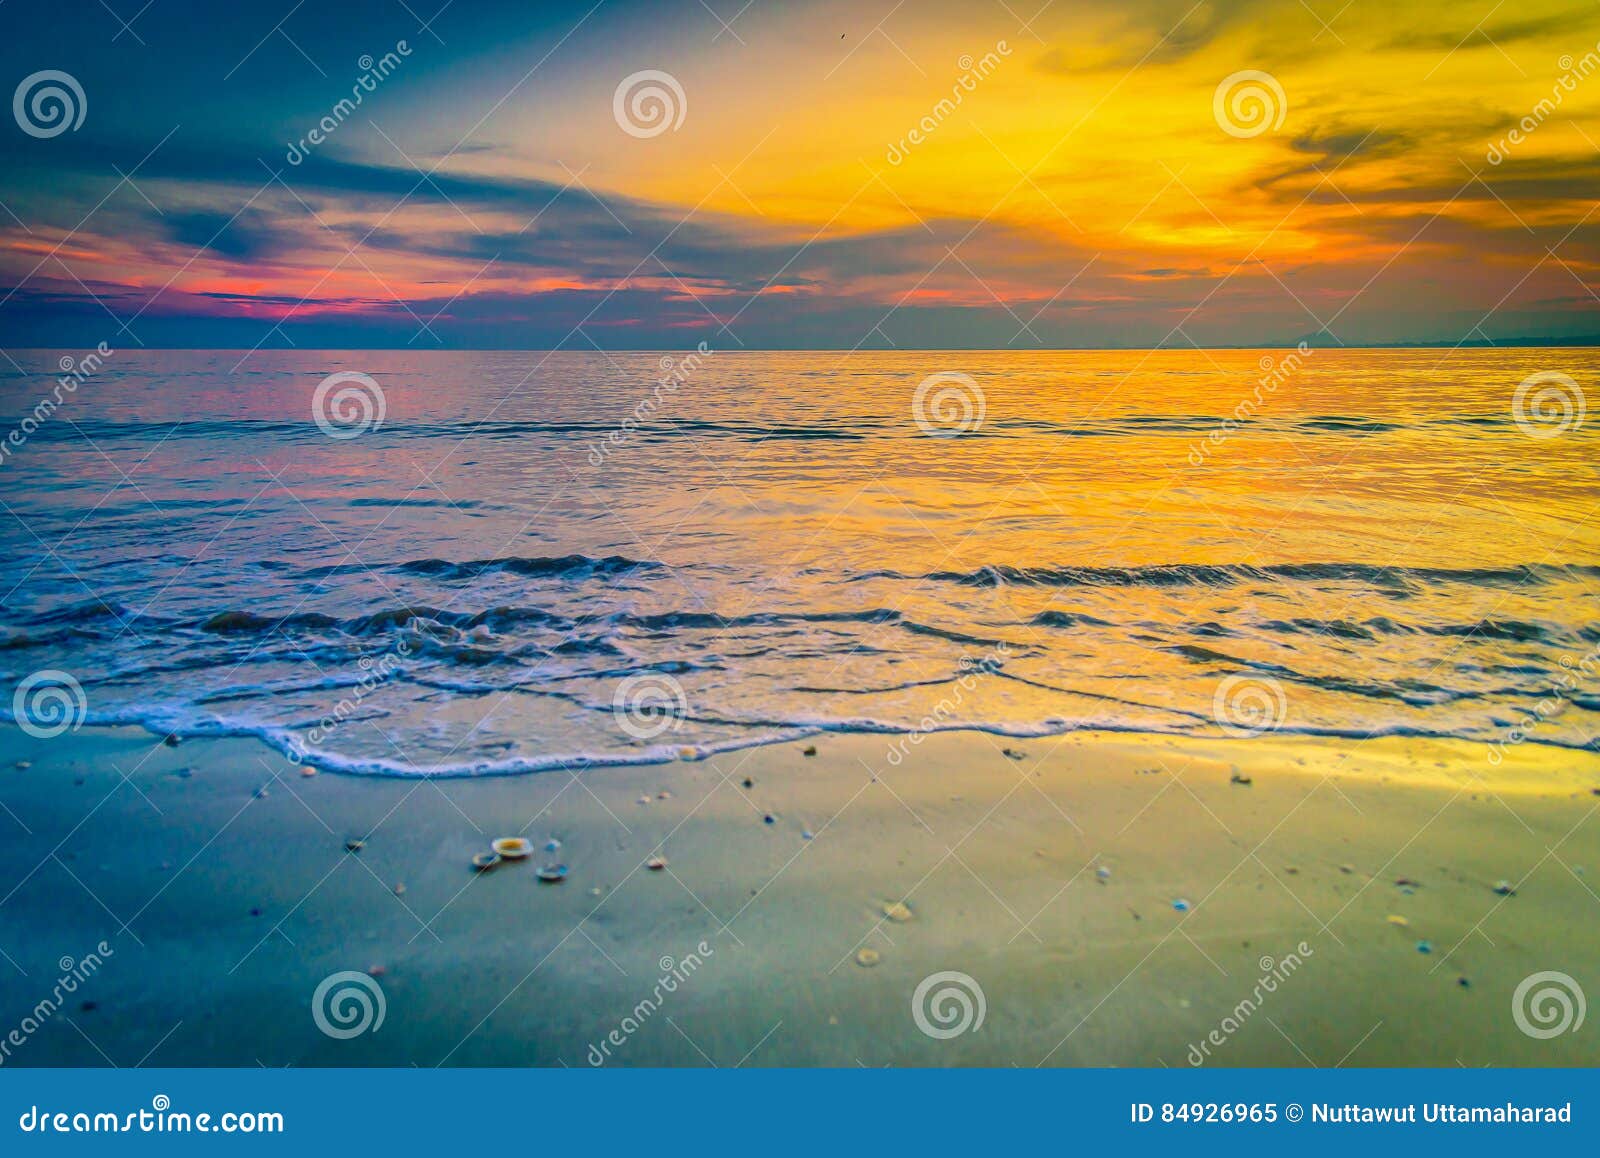 landscapes of sunset on the beach with colorful sky